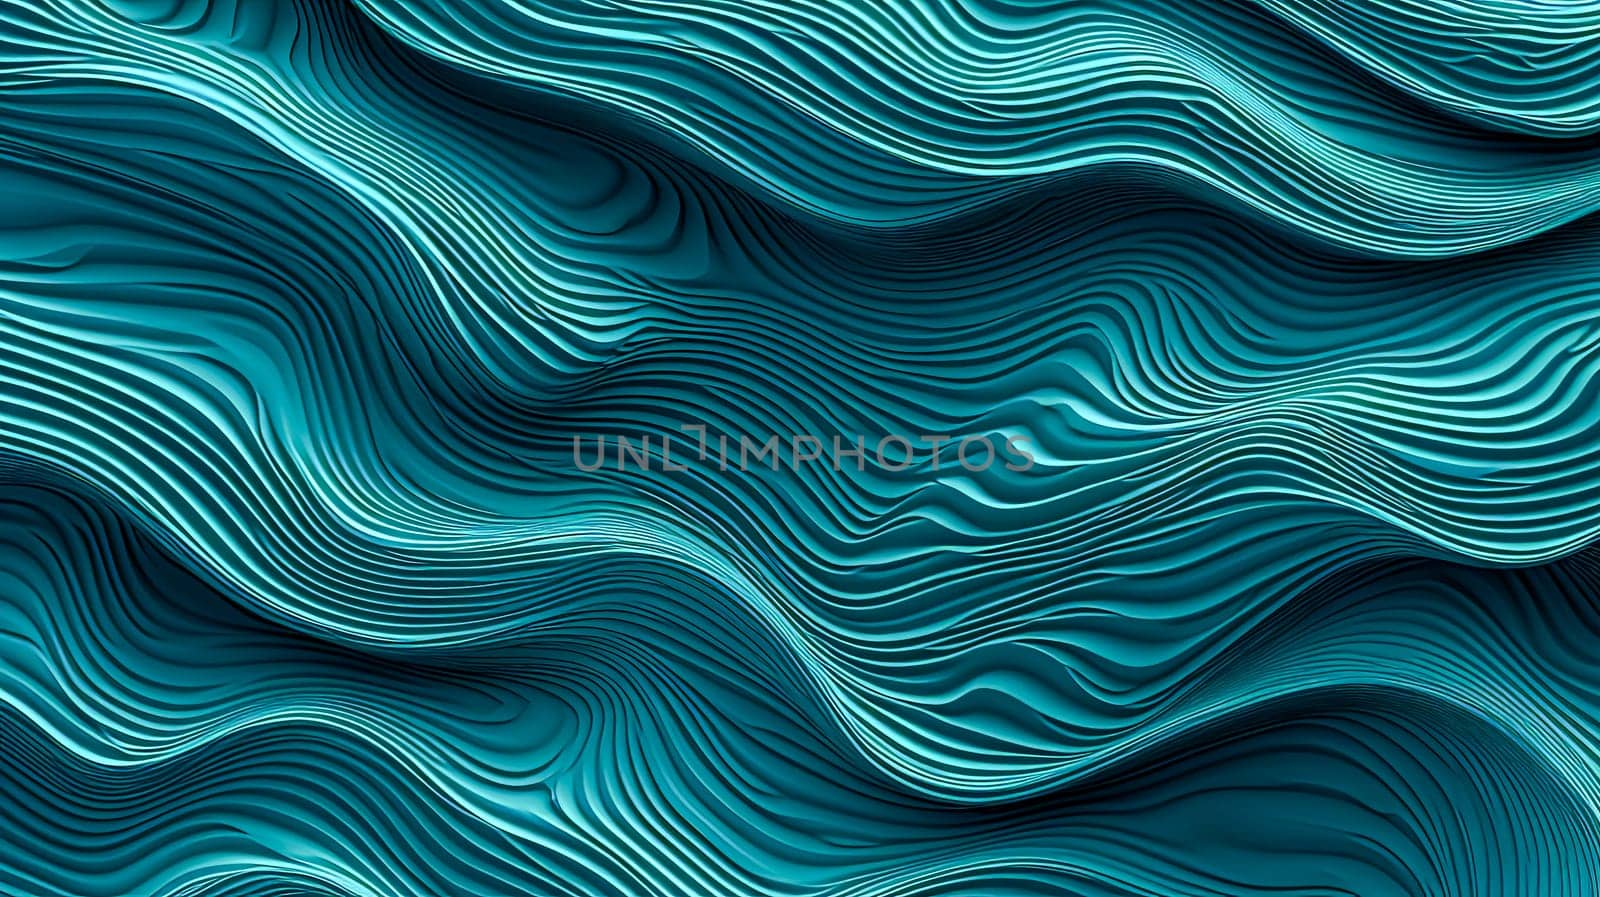 A blue wave with a lot of detail and a sense of movement. The image is abstract and has a calming effect